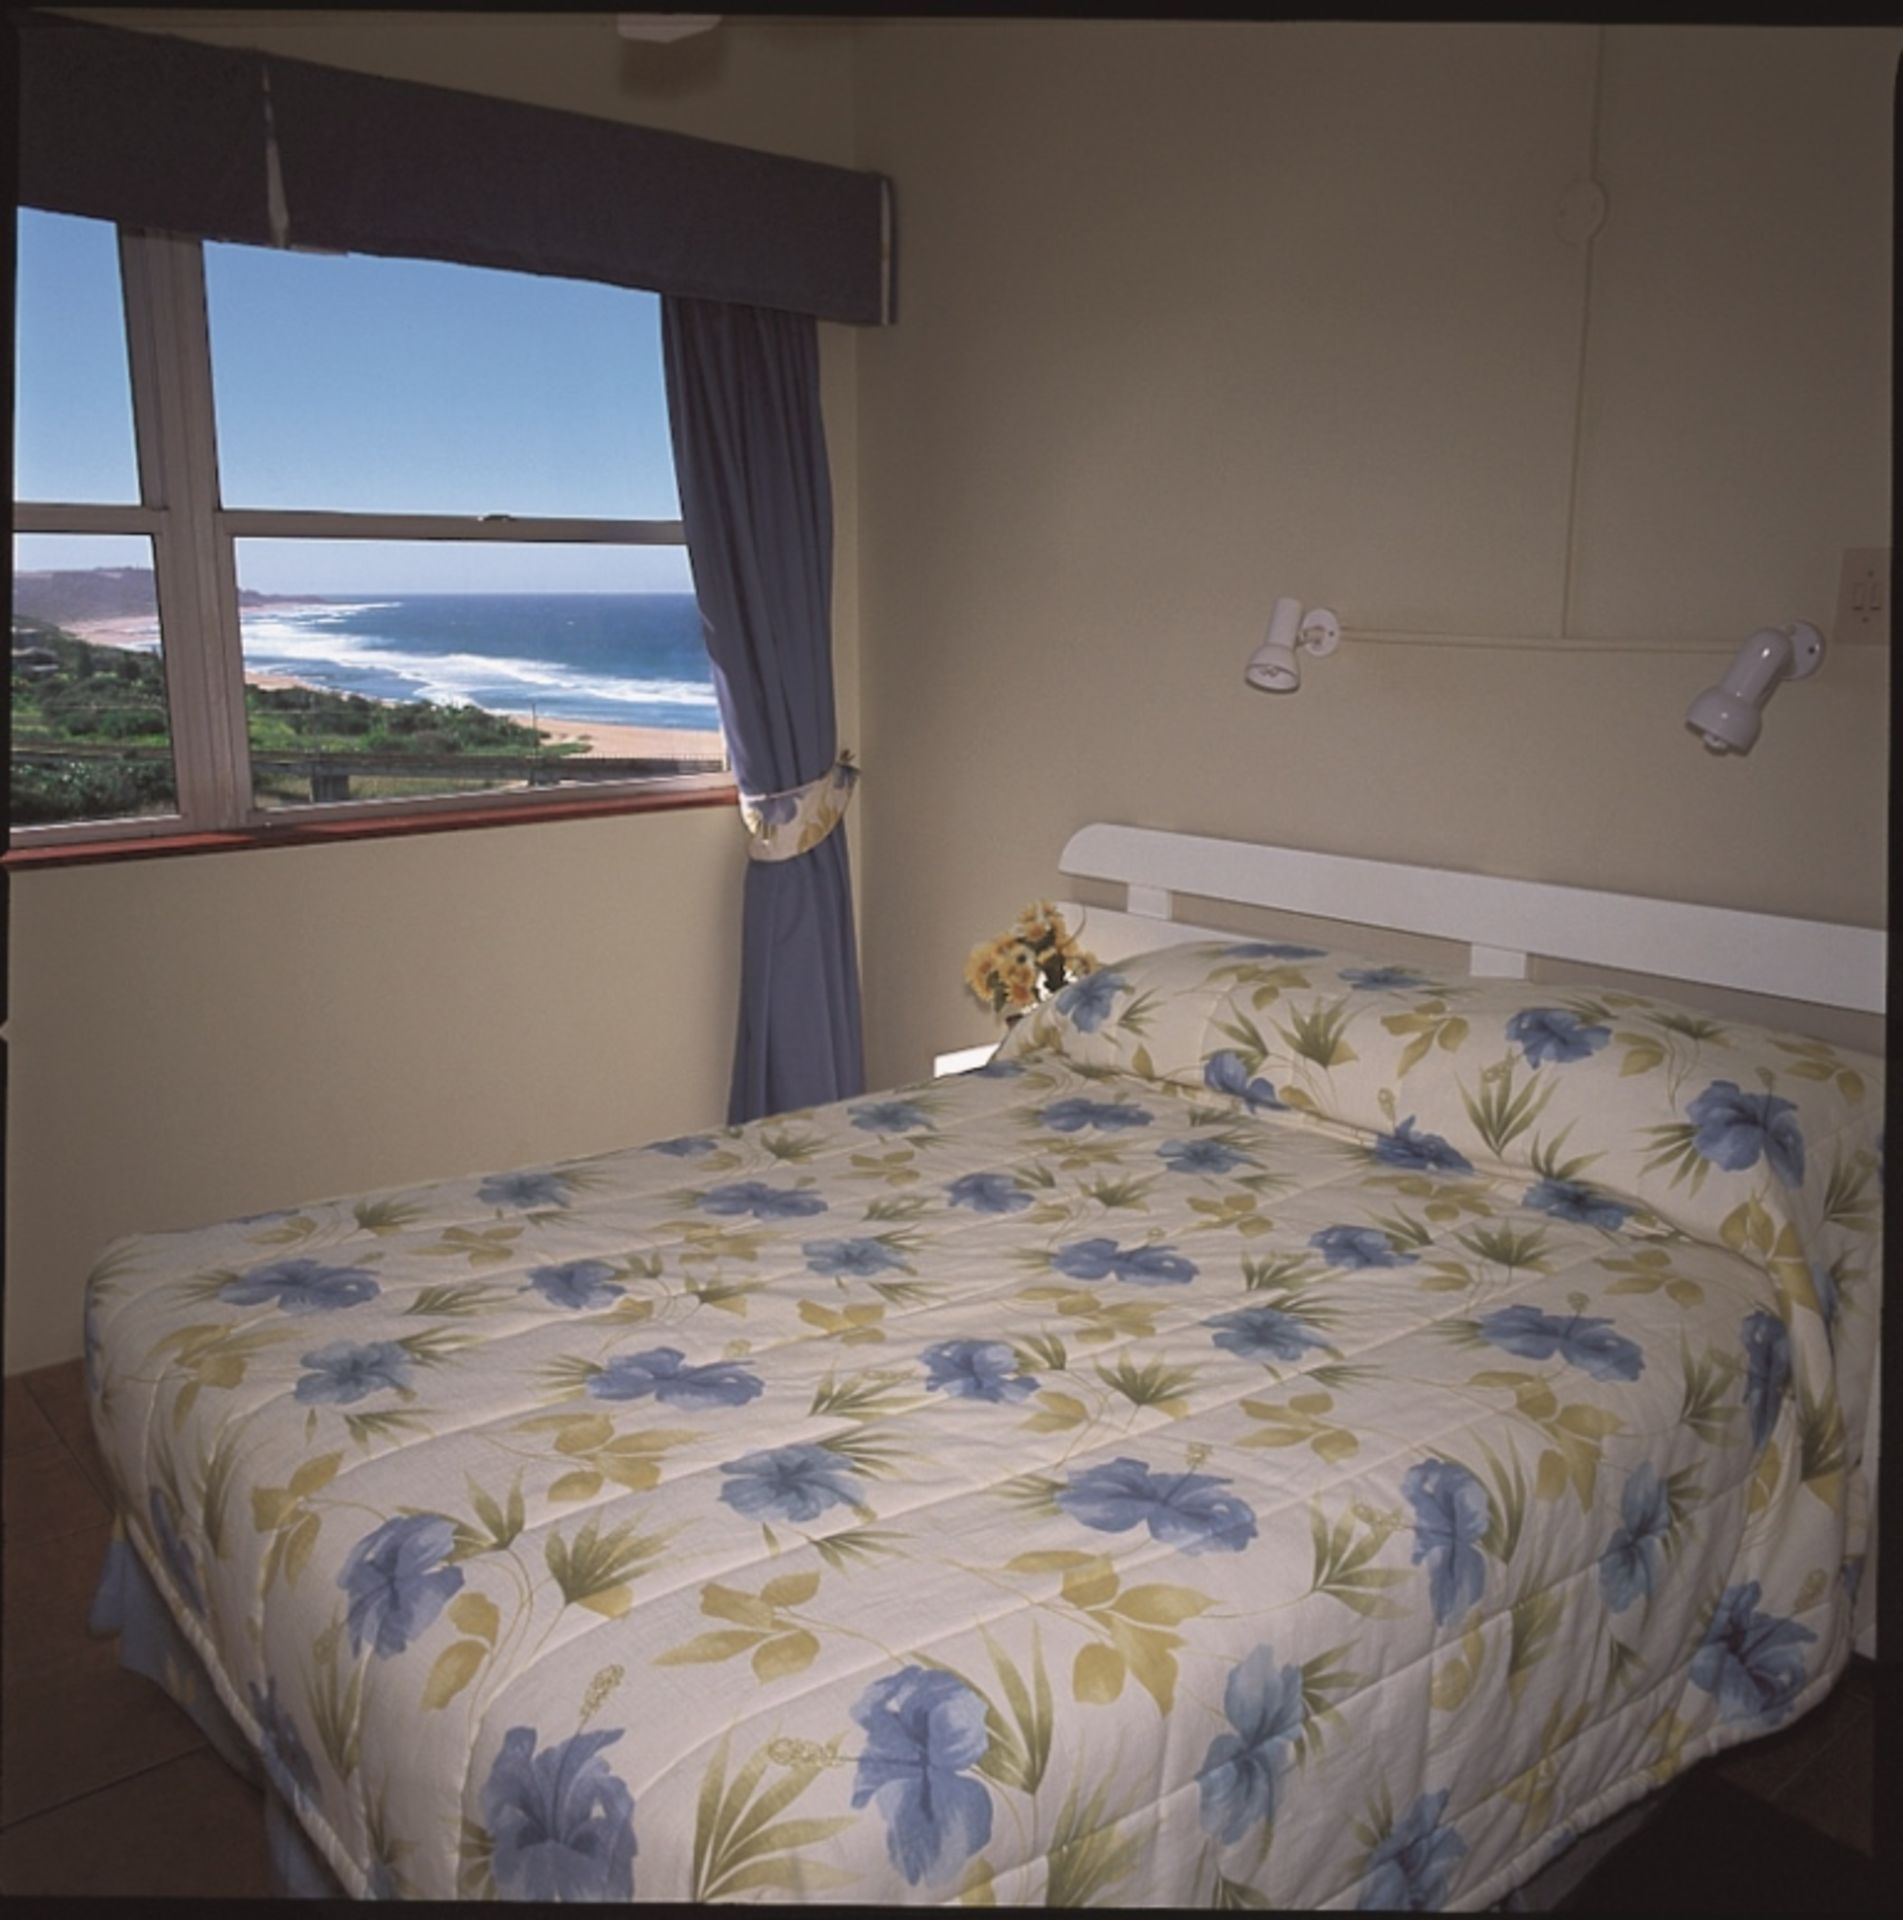 Pearly Shells - 3 Beds (8 Sleepers Max)  . Date - 20/05/2016 - 27/05/2016 - (Shareblock) - Image 26 of 32